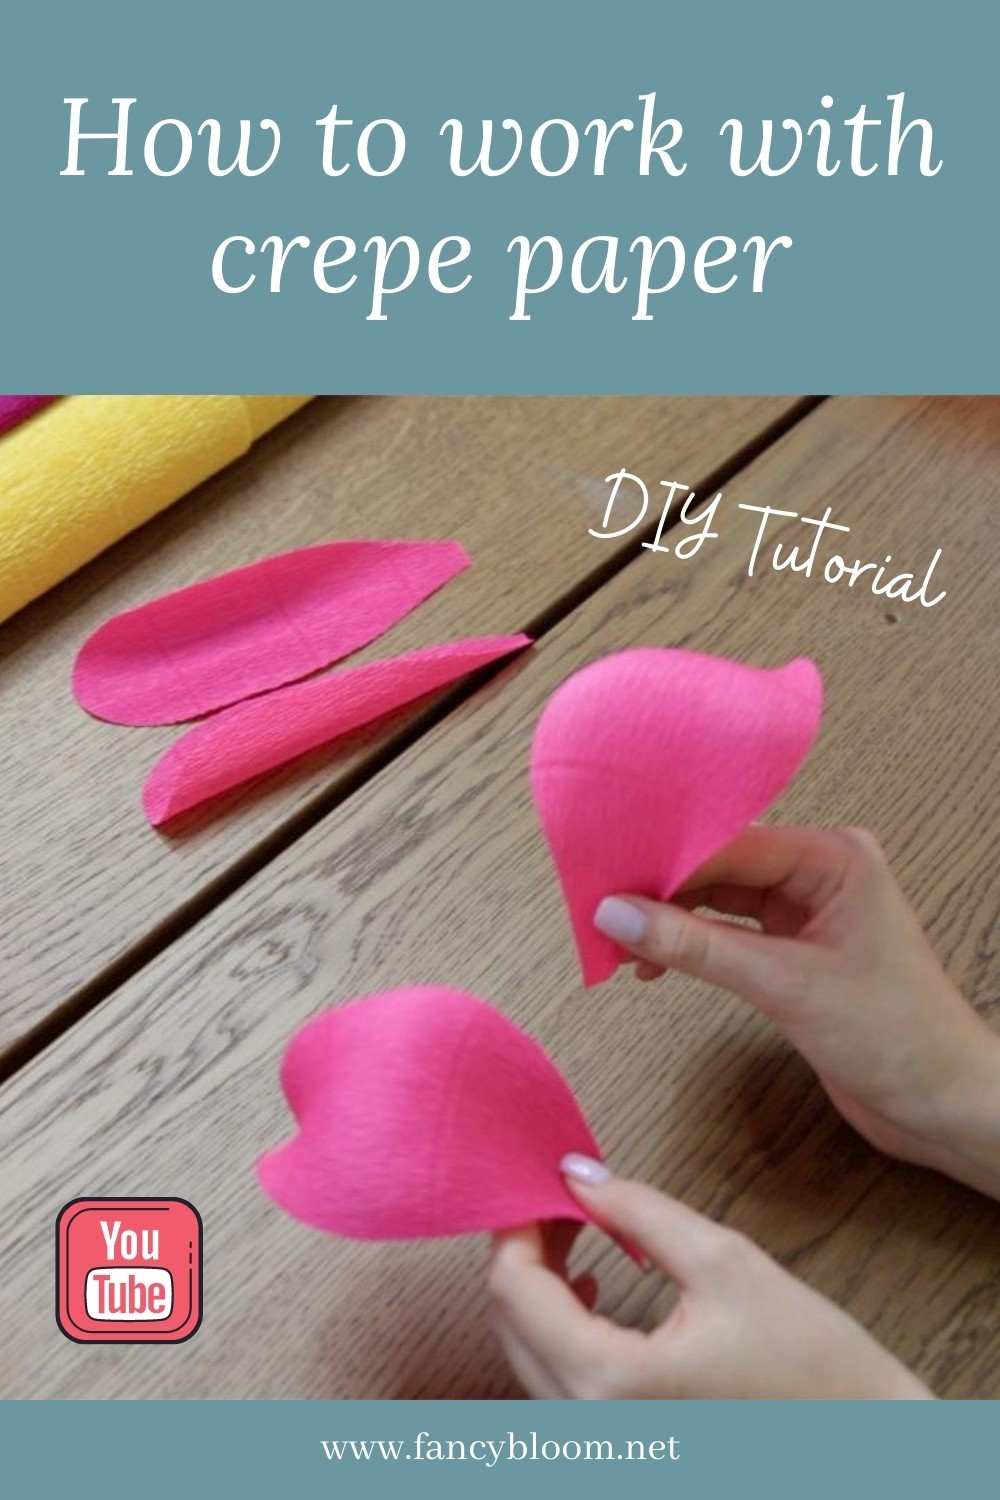 How to shape crepe paper